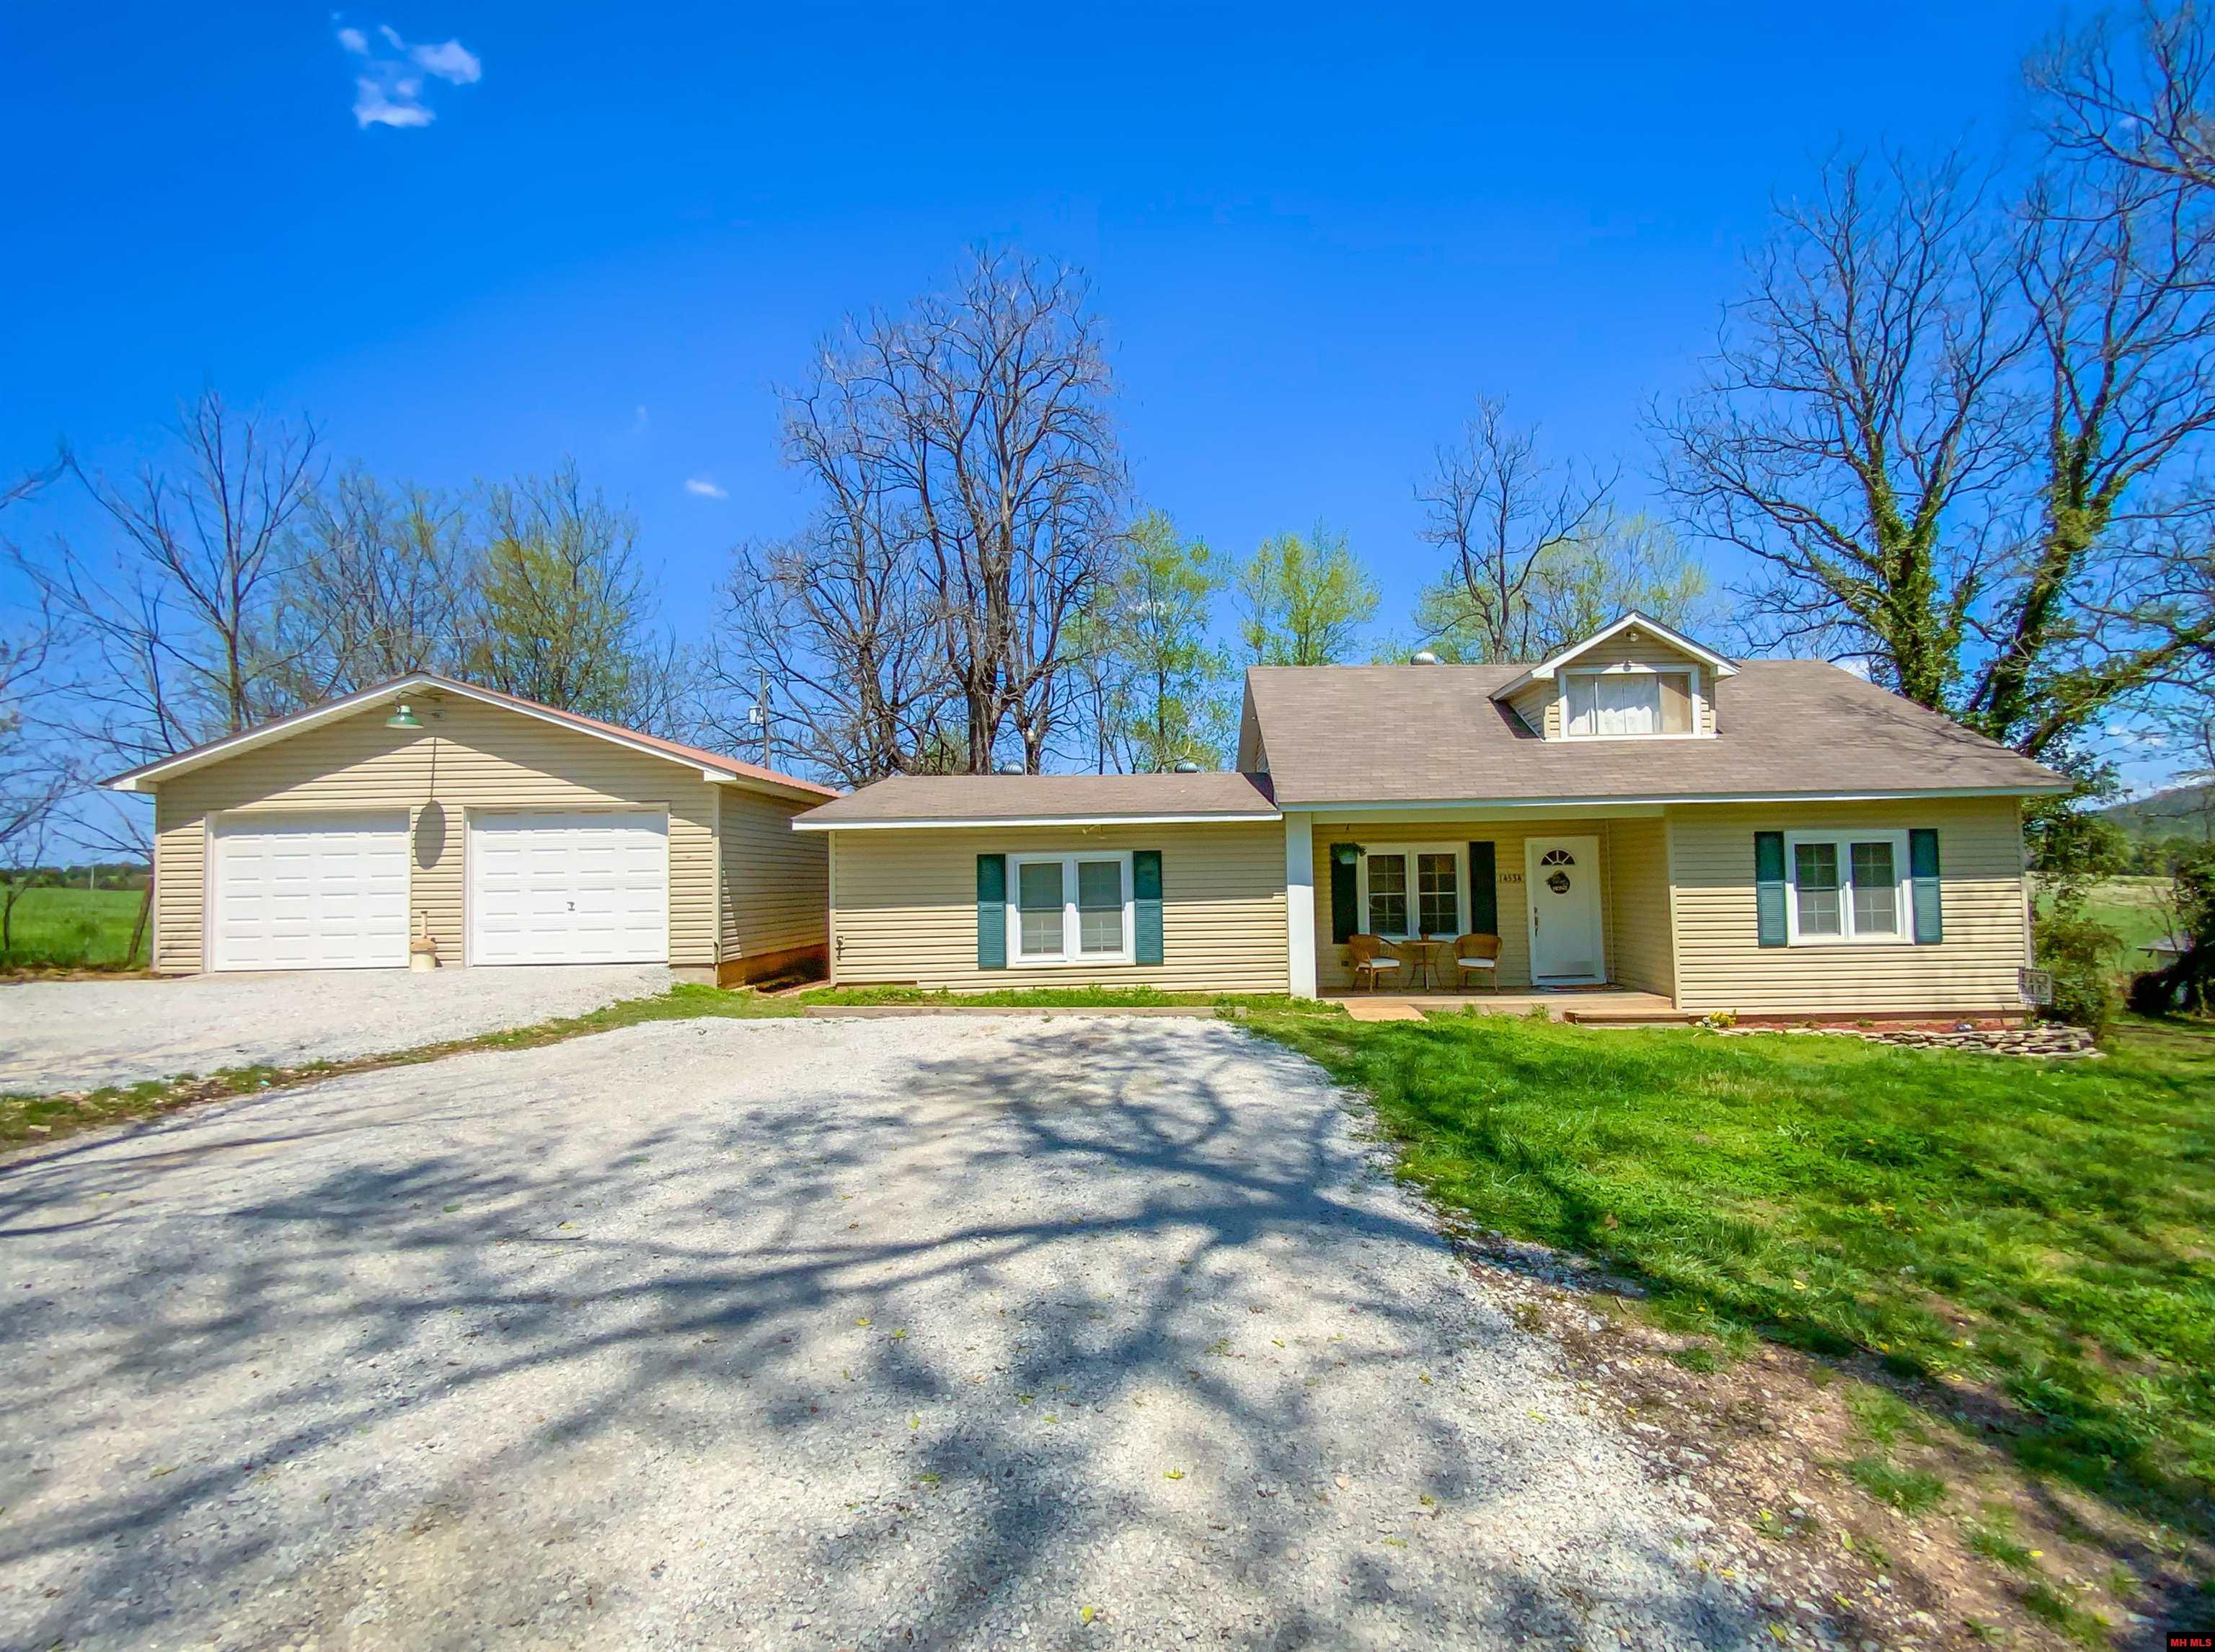 14534 N ARENA ROAD | Lead Hill, AR